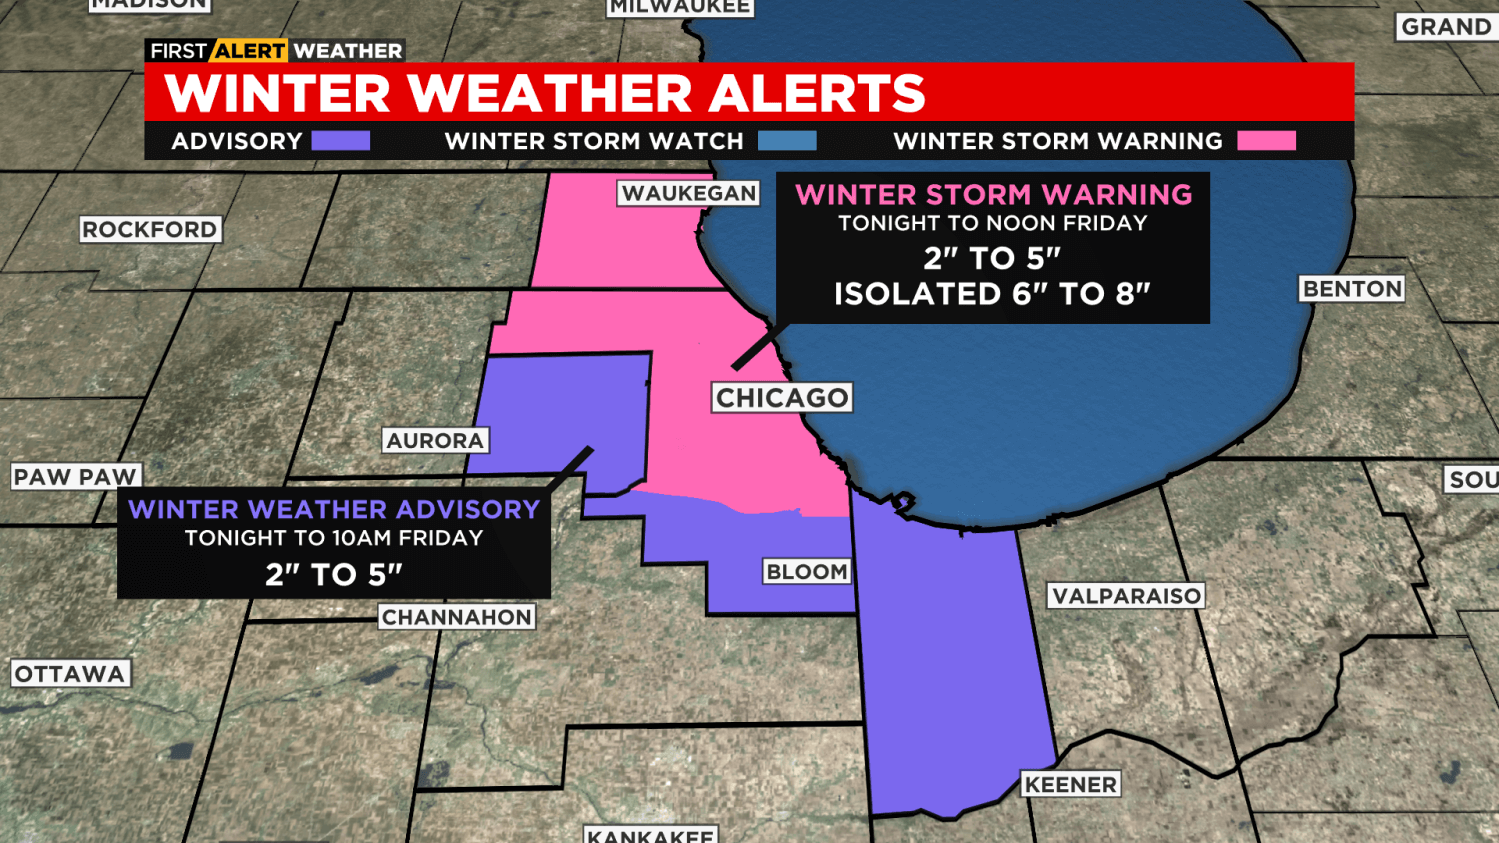 Winter Storm Warning Issued for Chicago, Northern Suburbs as Up to 8 Inches of Snow Possible